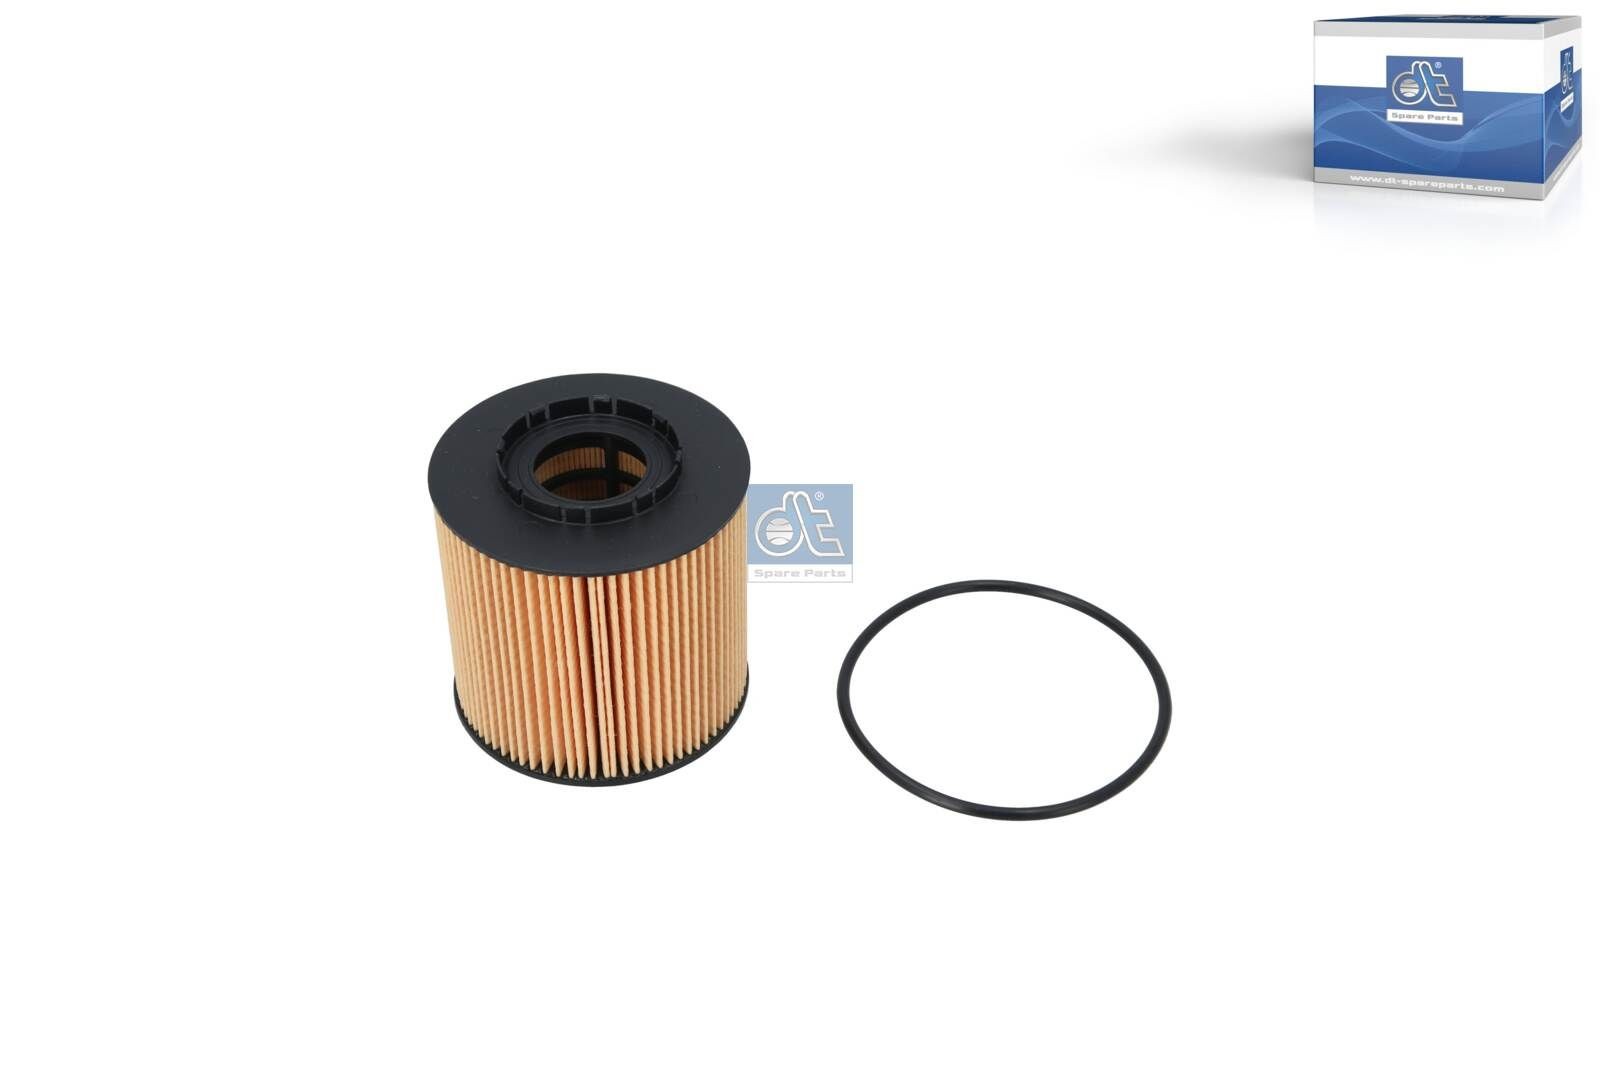 DT Spare Parts 6.24211 Oil filter RENAULT experience and price